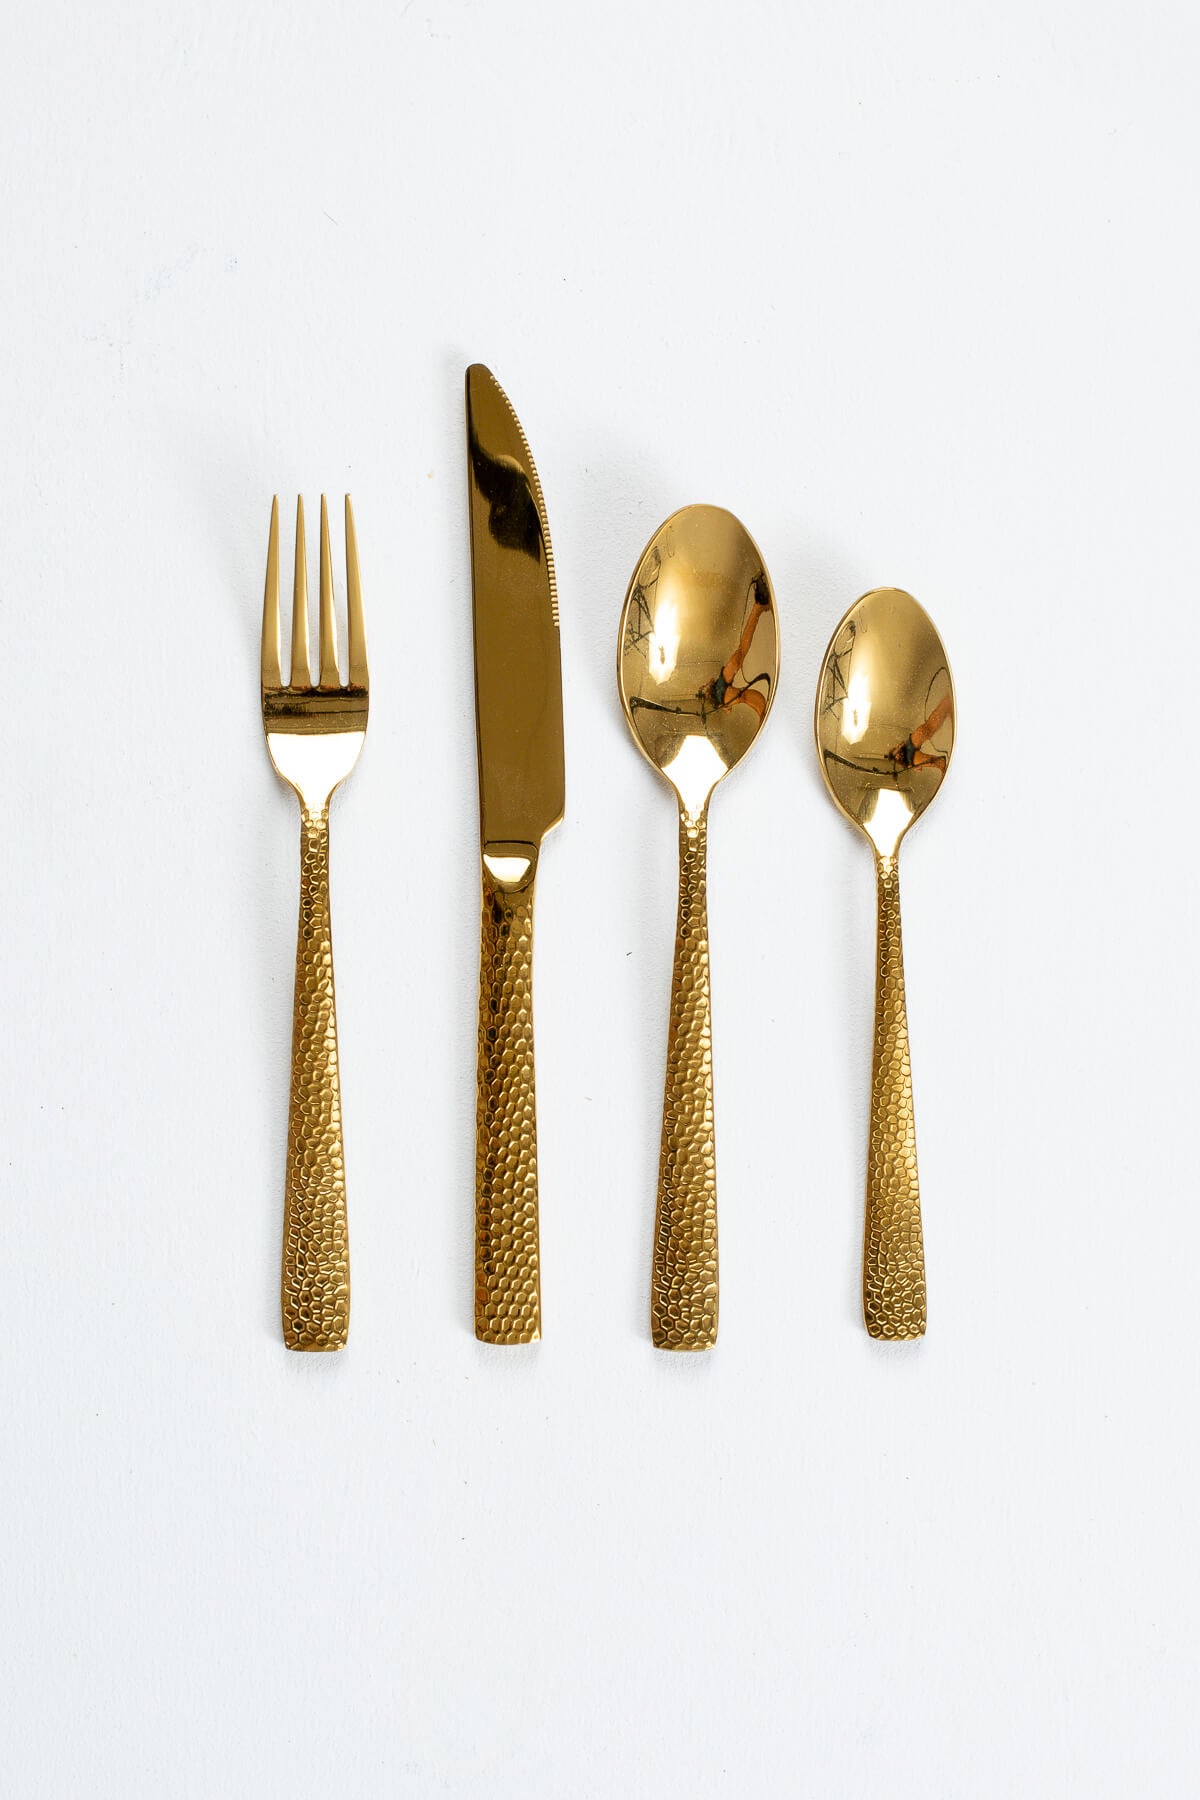 bloomingville gold cutlery set hammered gold cutlery set gold silverware set